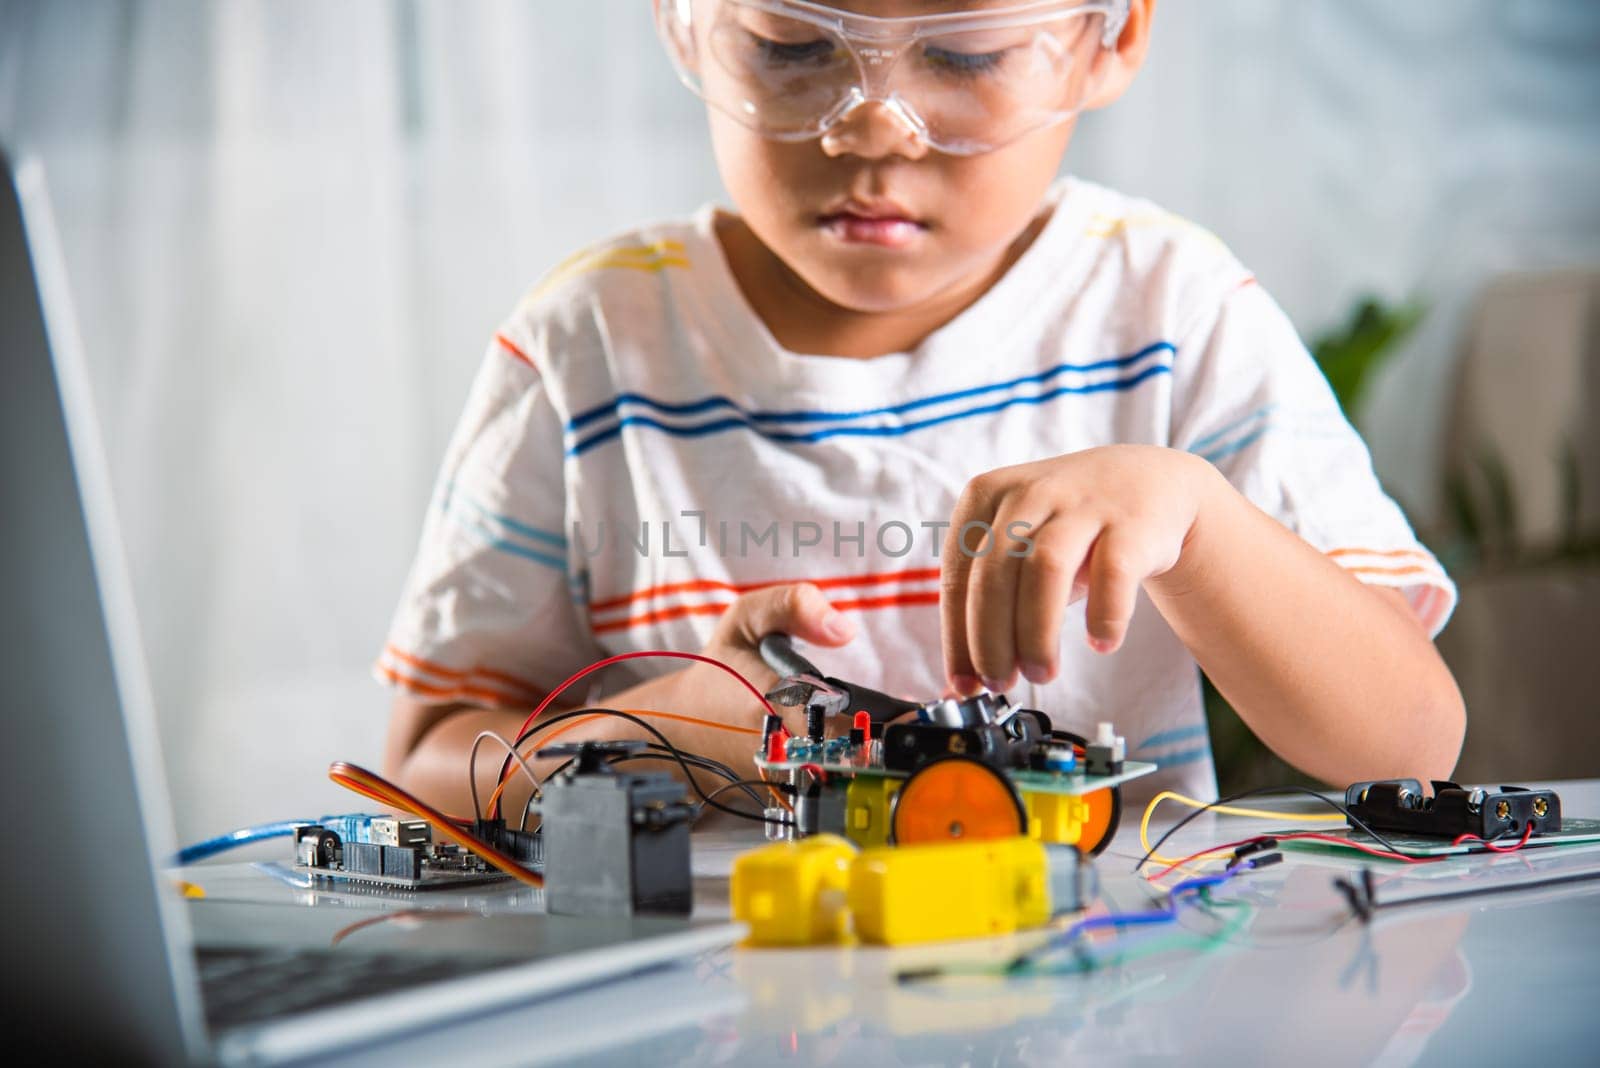 Little child tighten the nut with a screwdriver to assemble car toy, Asian kid boy assembling the Arduino robot car homework project at home, education AI technology workshop school learning lesson